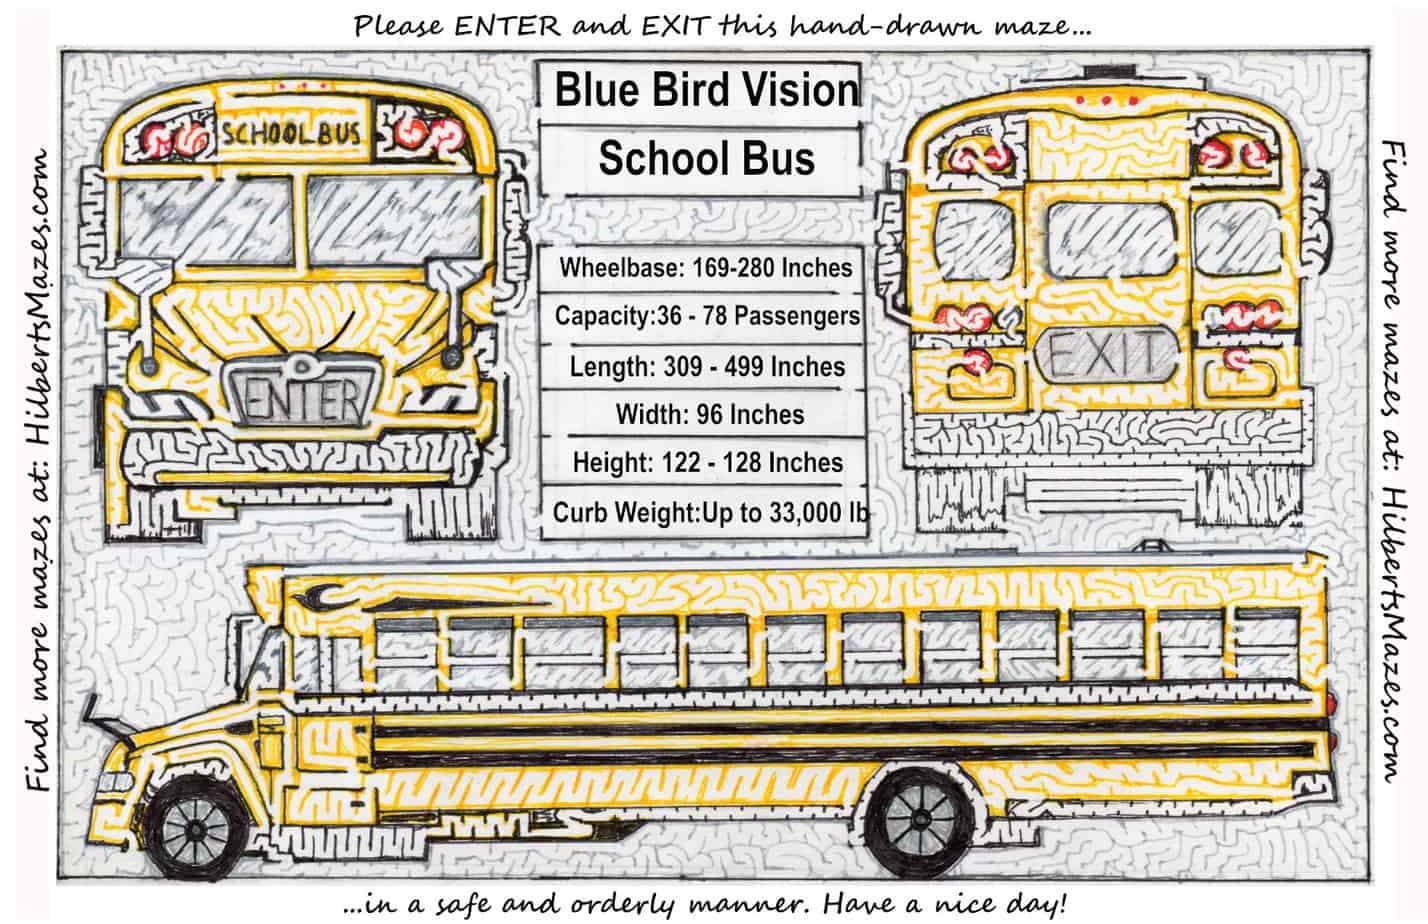 Free Printable Hand Drawn School Bus Maze. Easily downloadable and printable PDF format. Great Mazes for both kids & adults very challenging but fun.